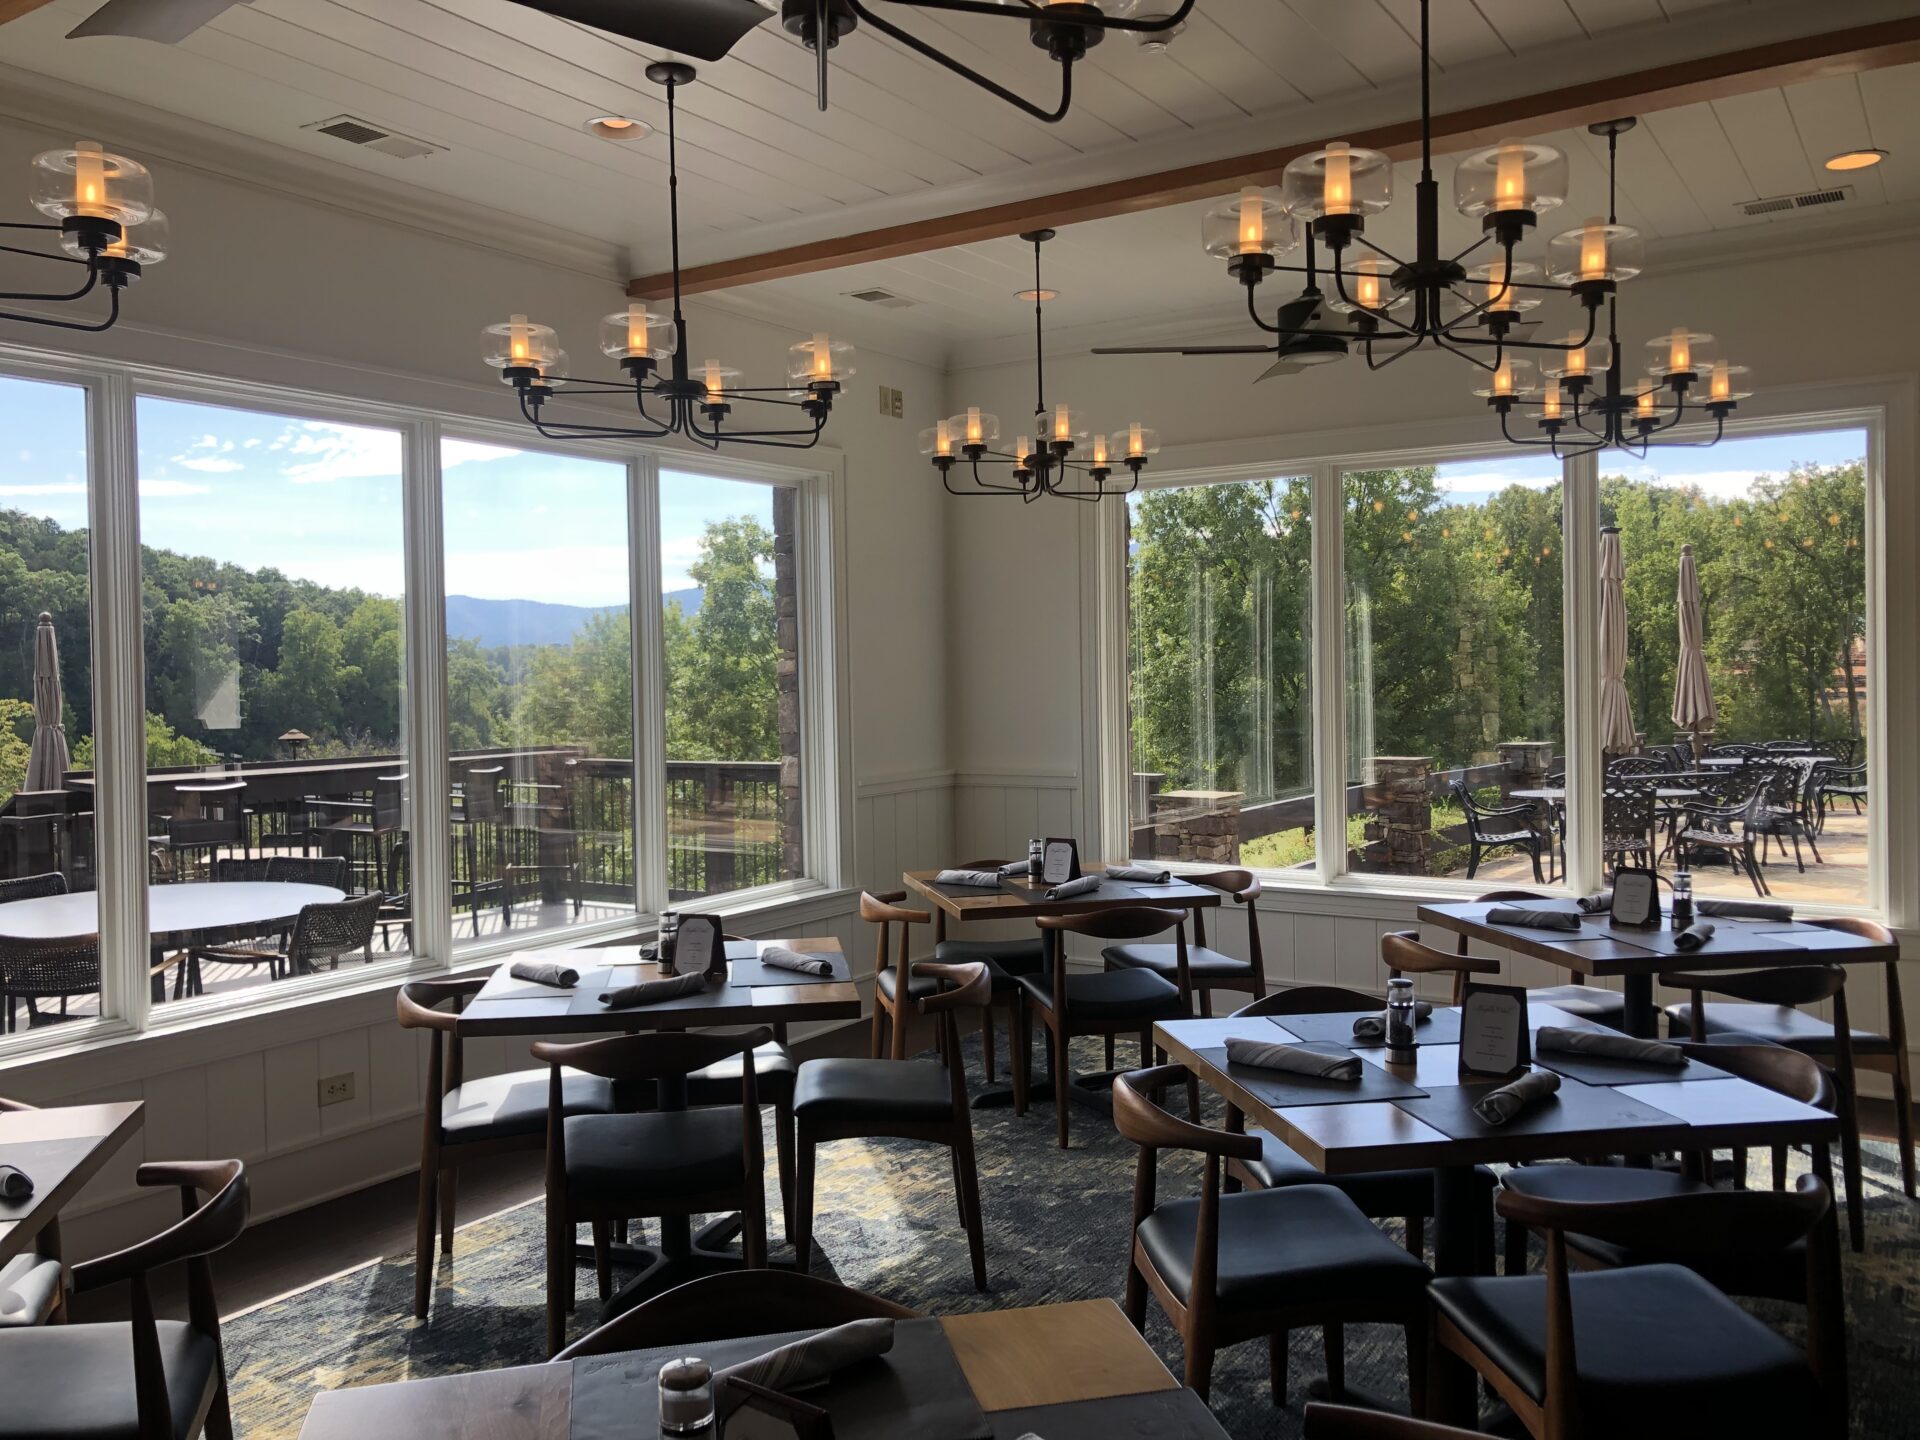 The Water Wheel Grille at Bright's Creek is the perfect spot for everyday casual dining